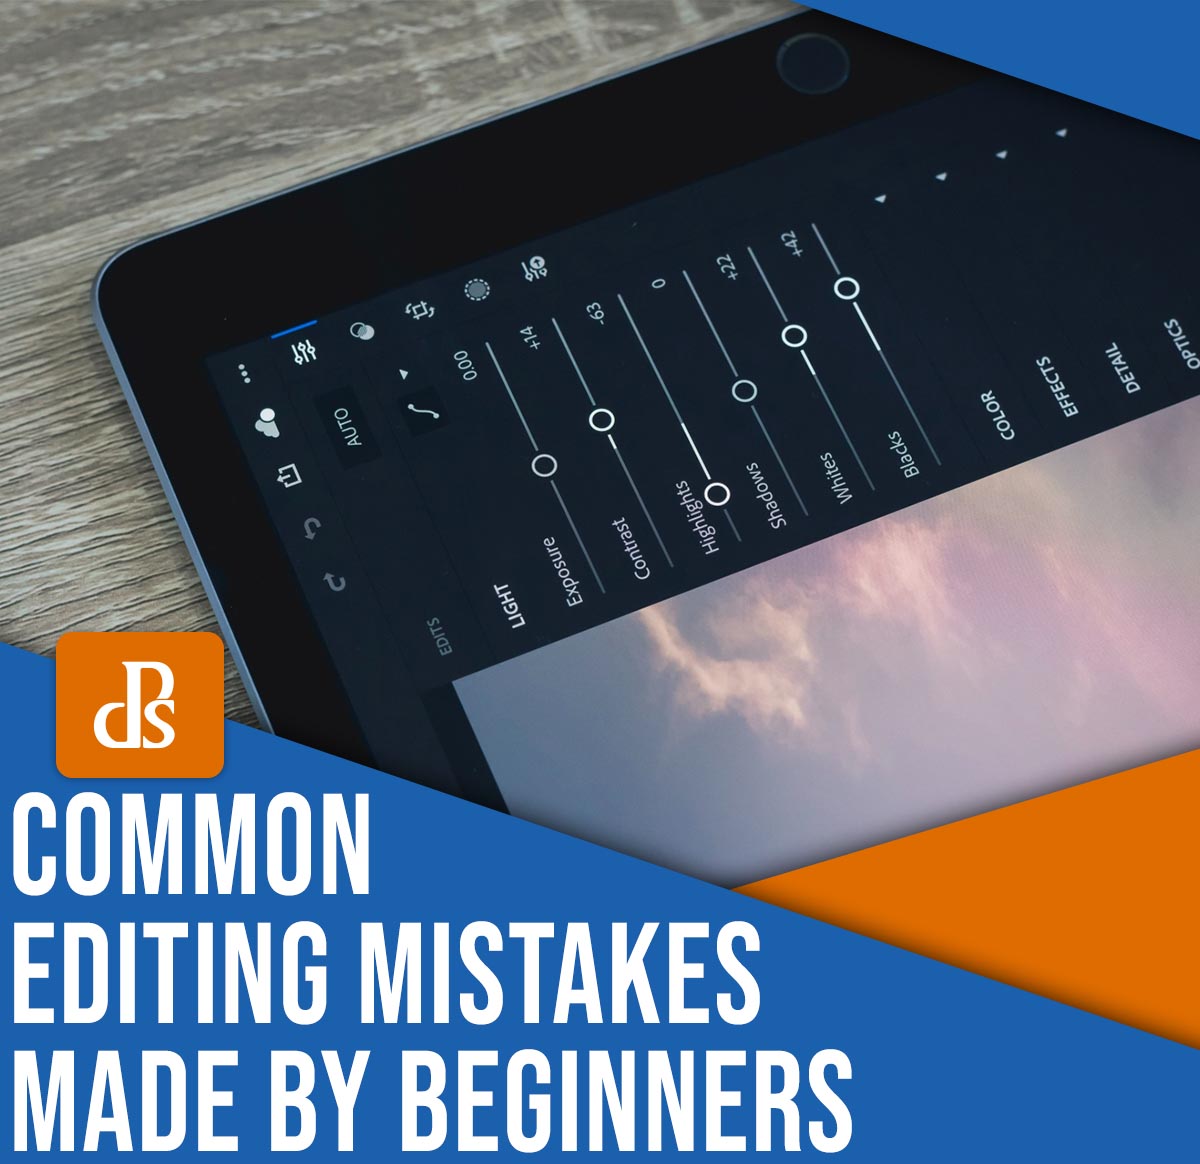 Common editing mistakes made by beginners